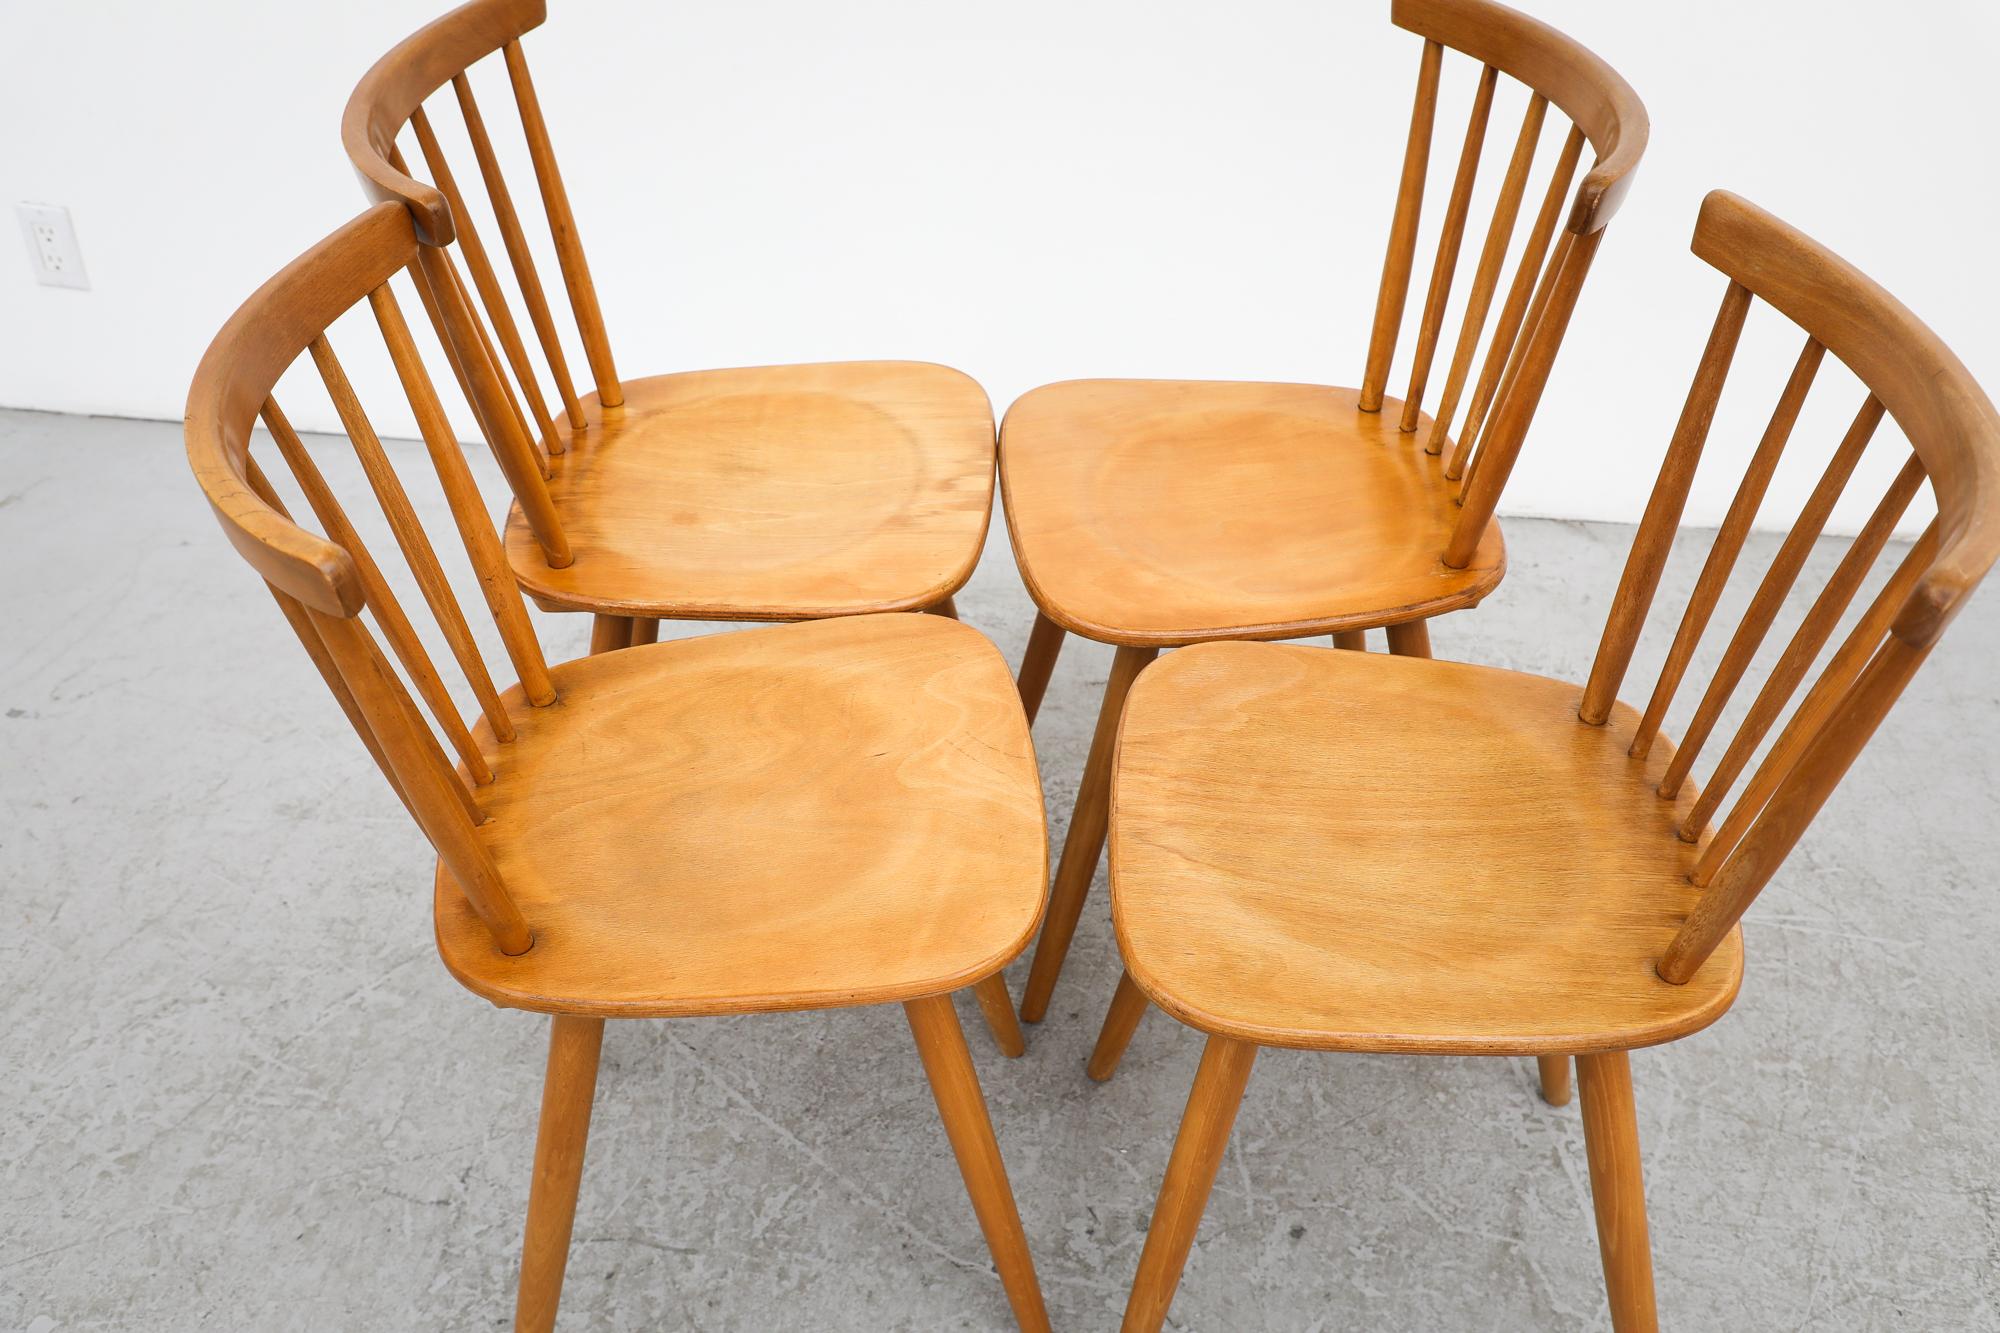 20th Century Set of 4 Blonde Wood Tapiovaara Inspired Spindle Back Chairs by Farstrup For Sale